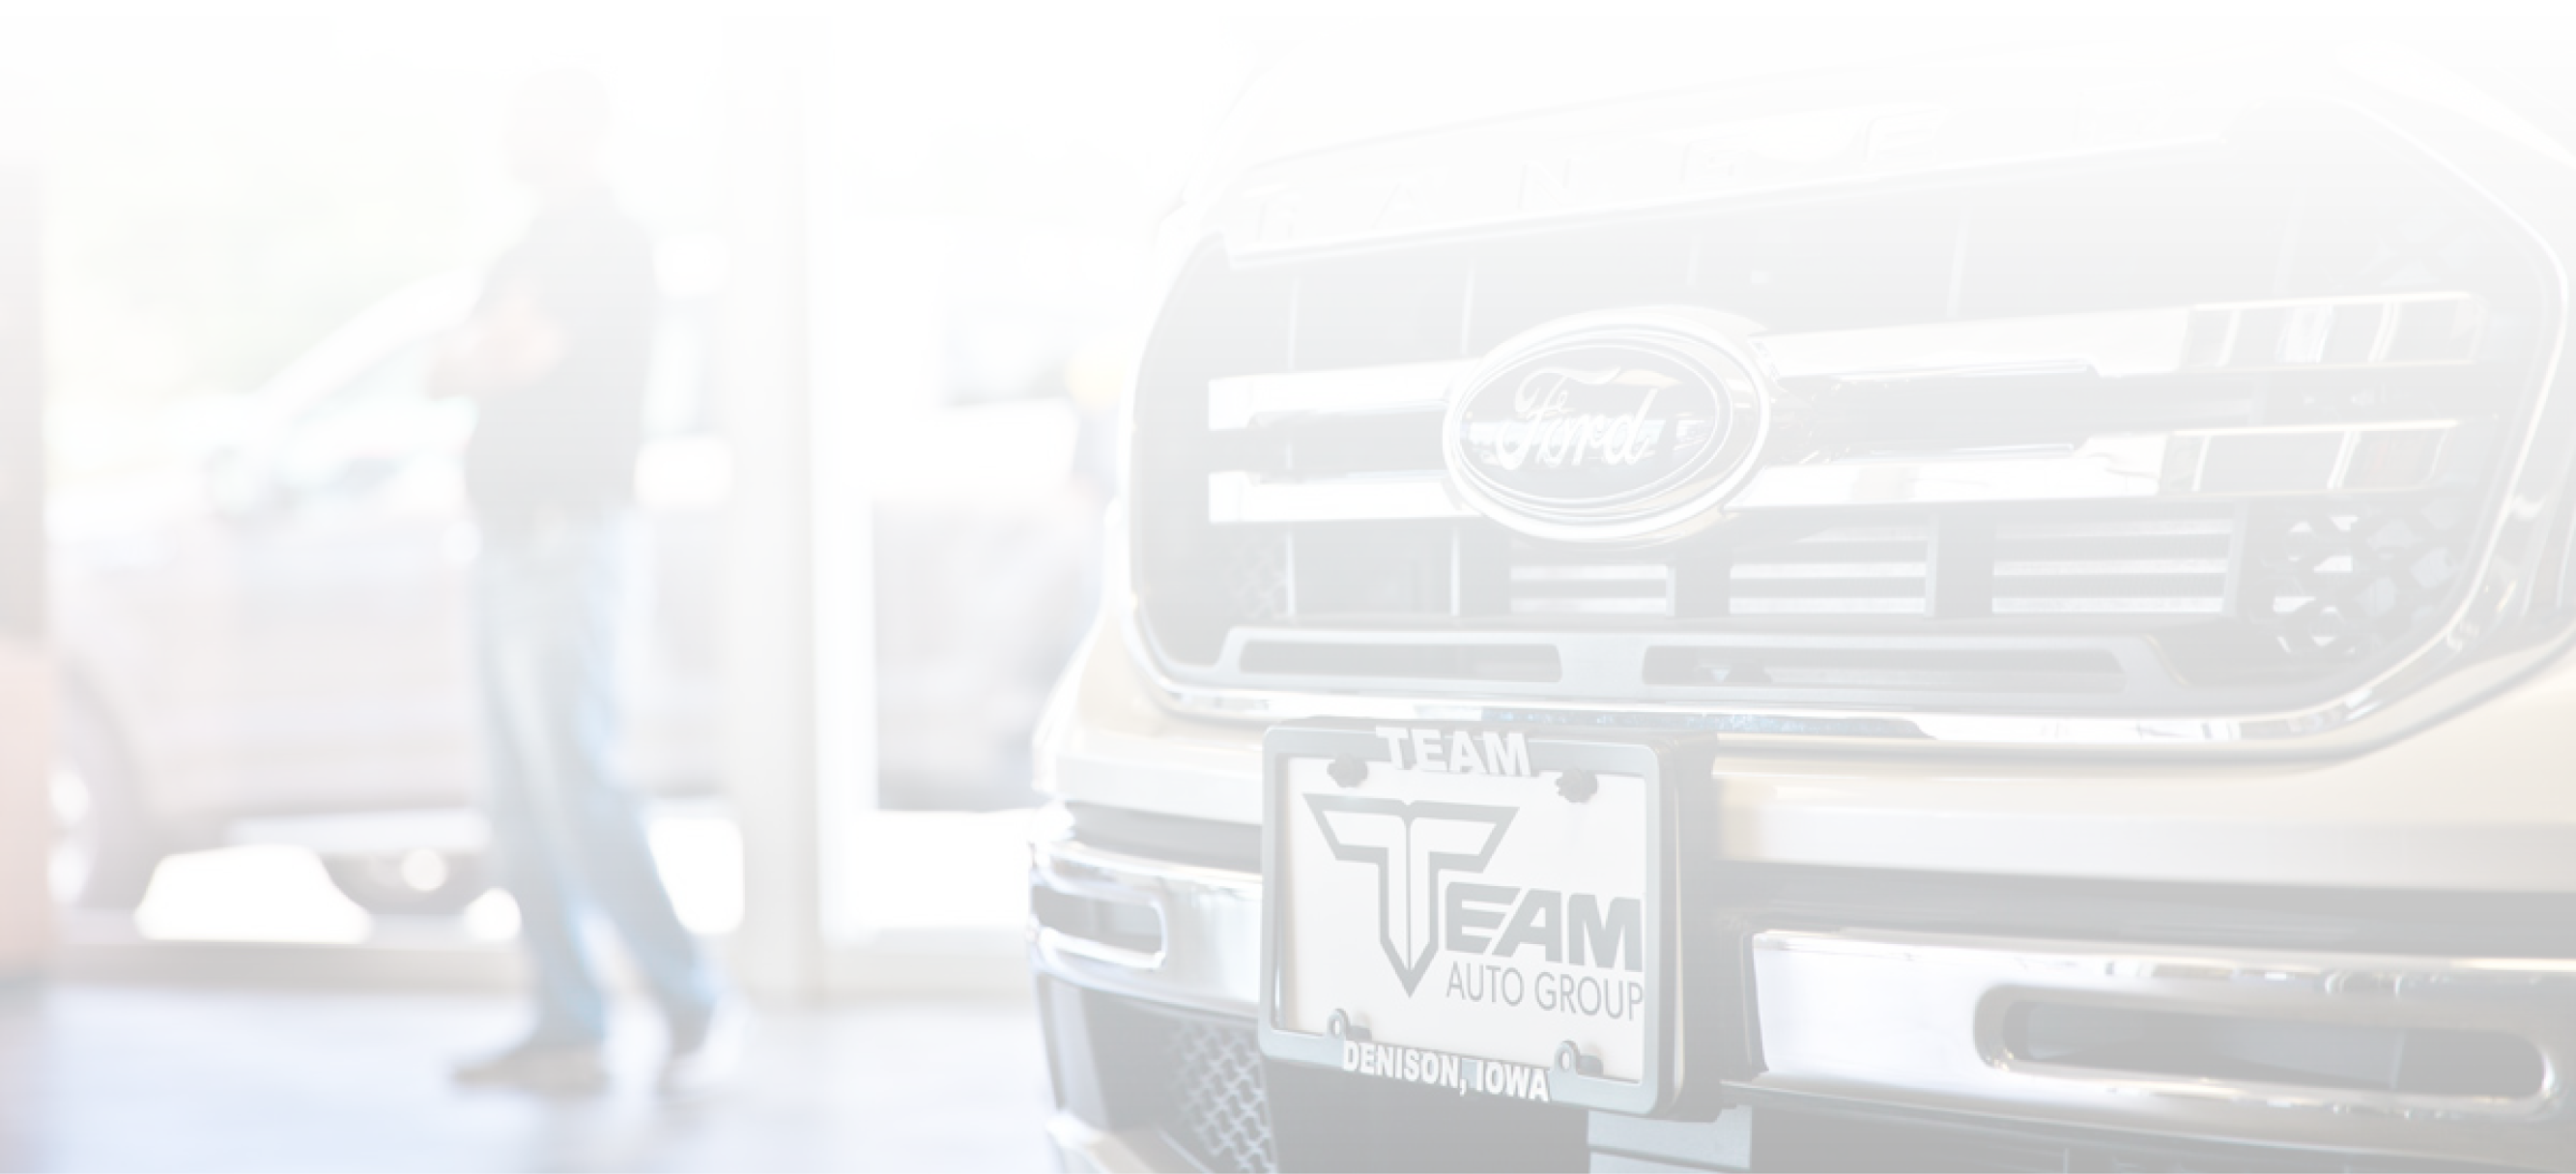 Team Auto Group Showroom With Ford Truck and Sales Associate